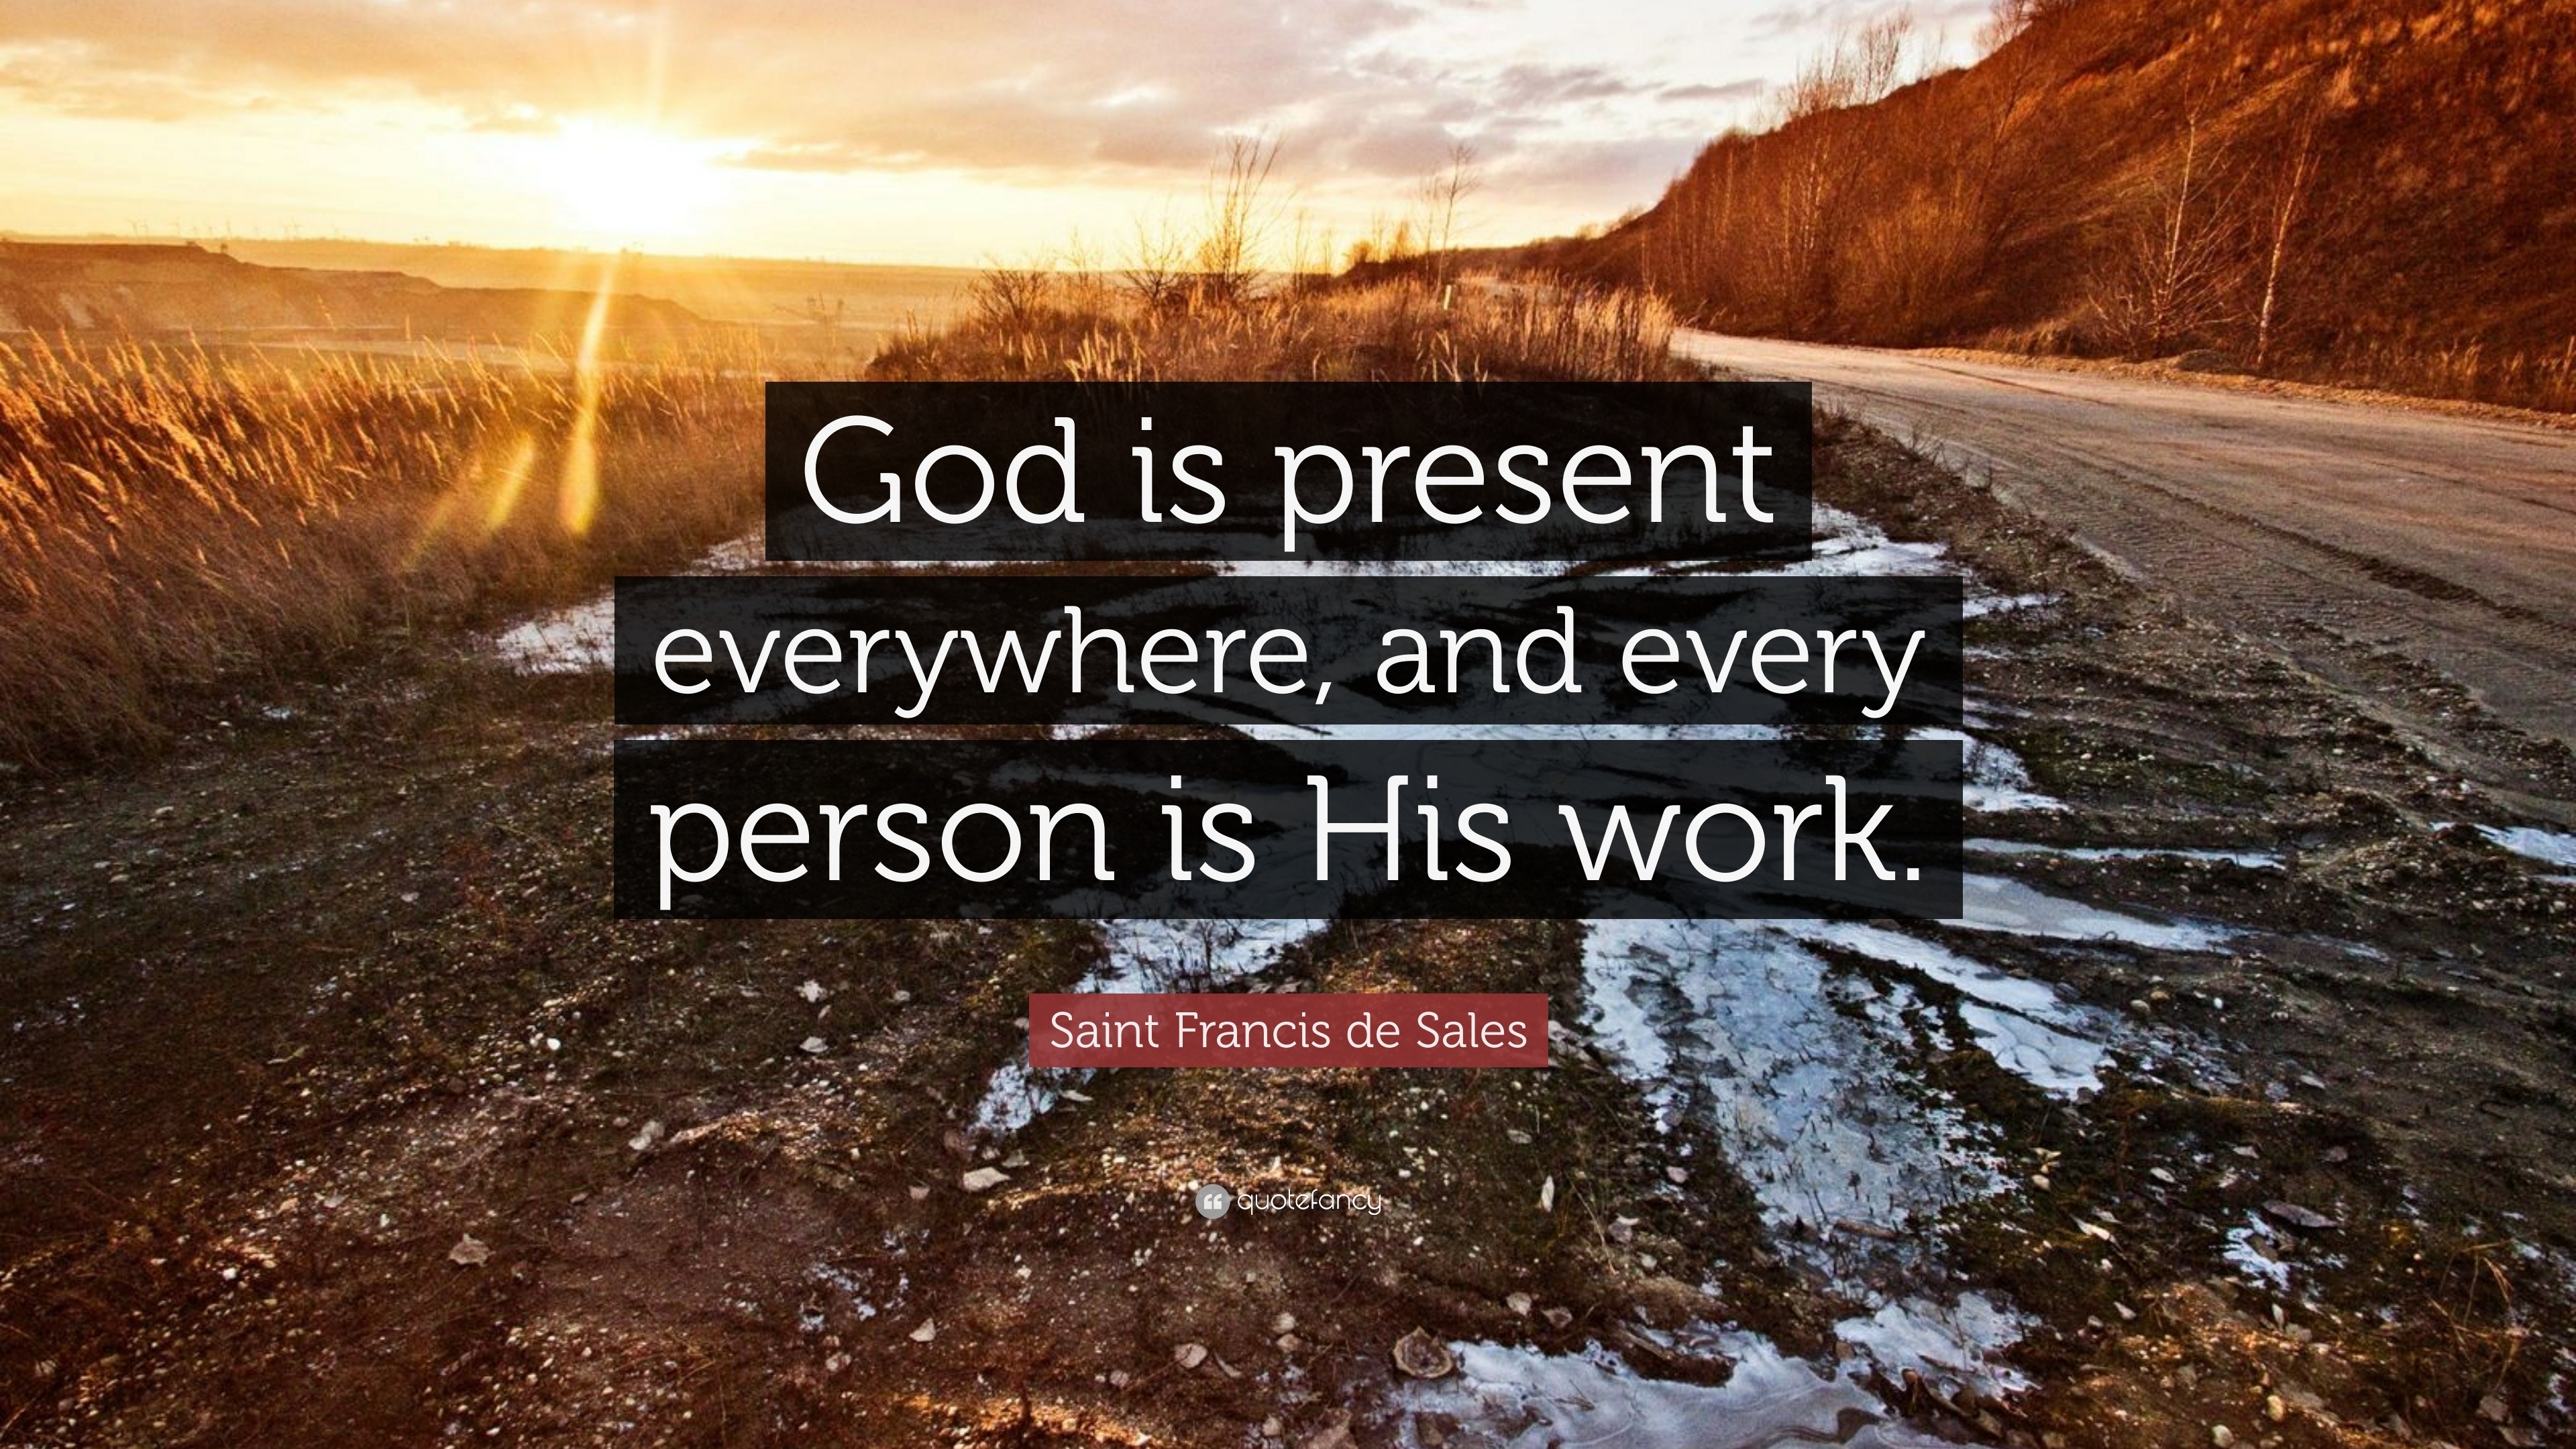 WHO IS GOD? - Where God Lives? - Is God Present Everywhere?